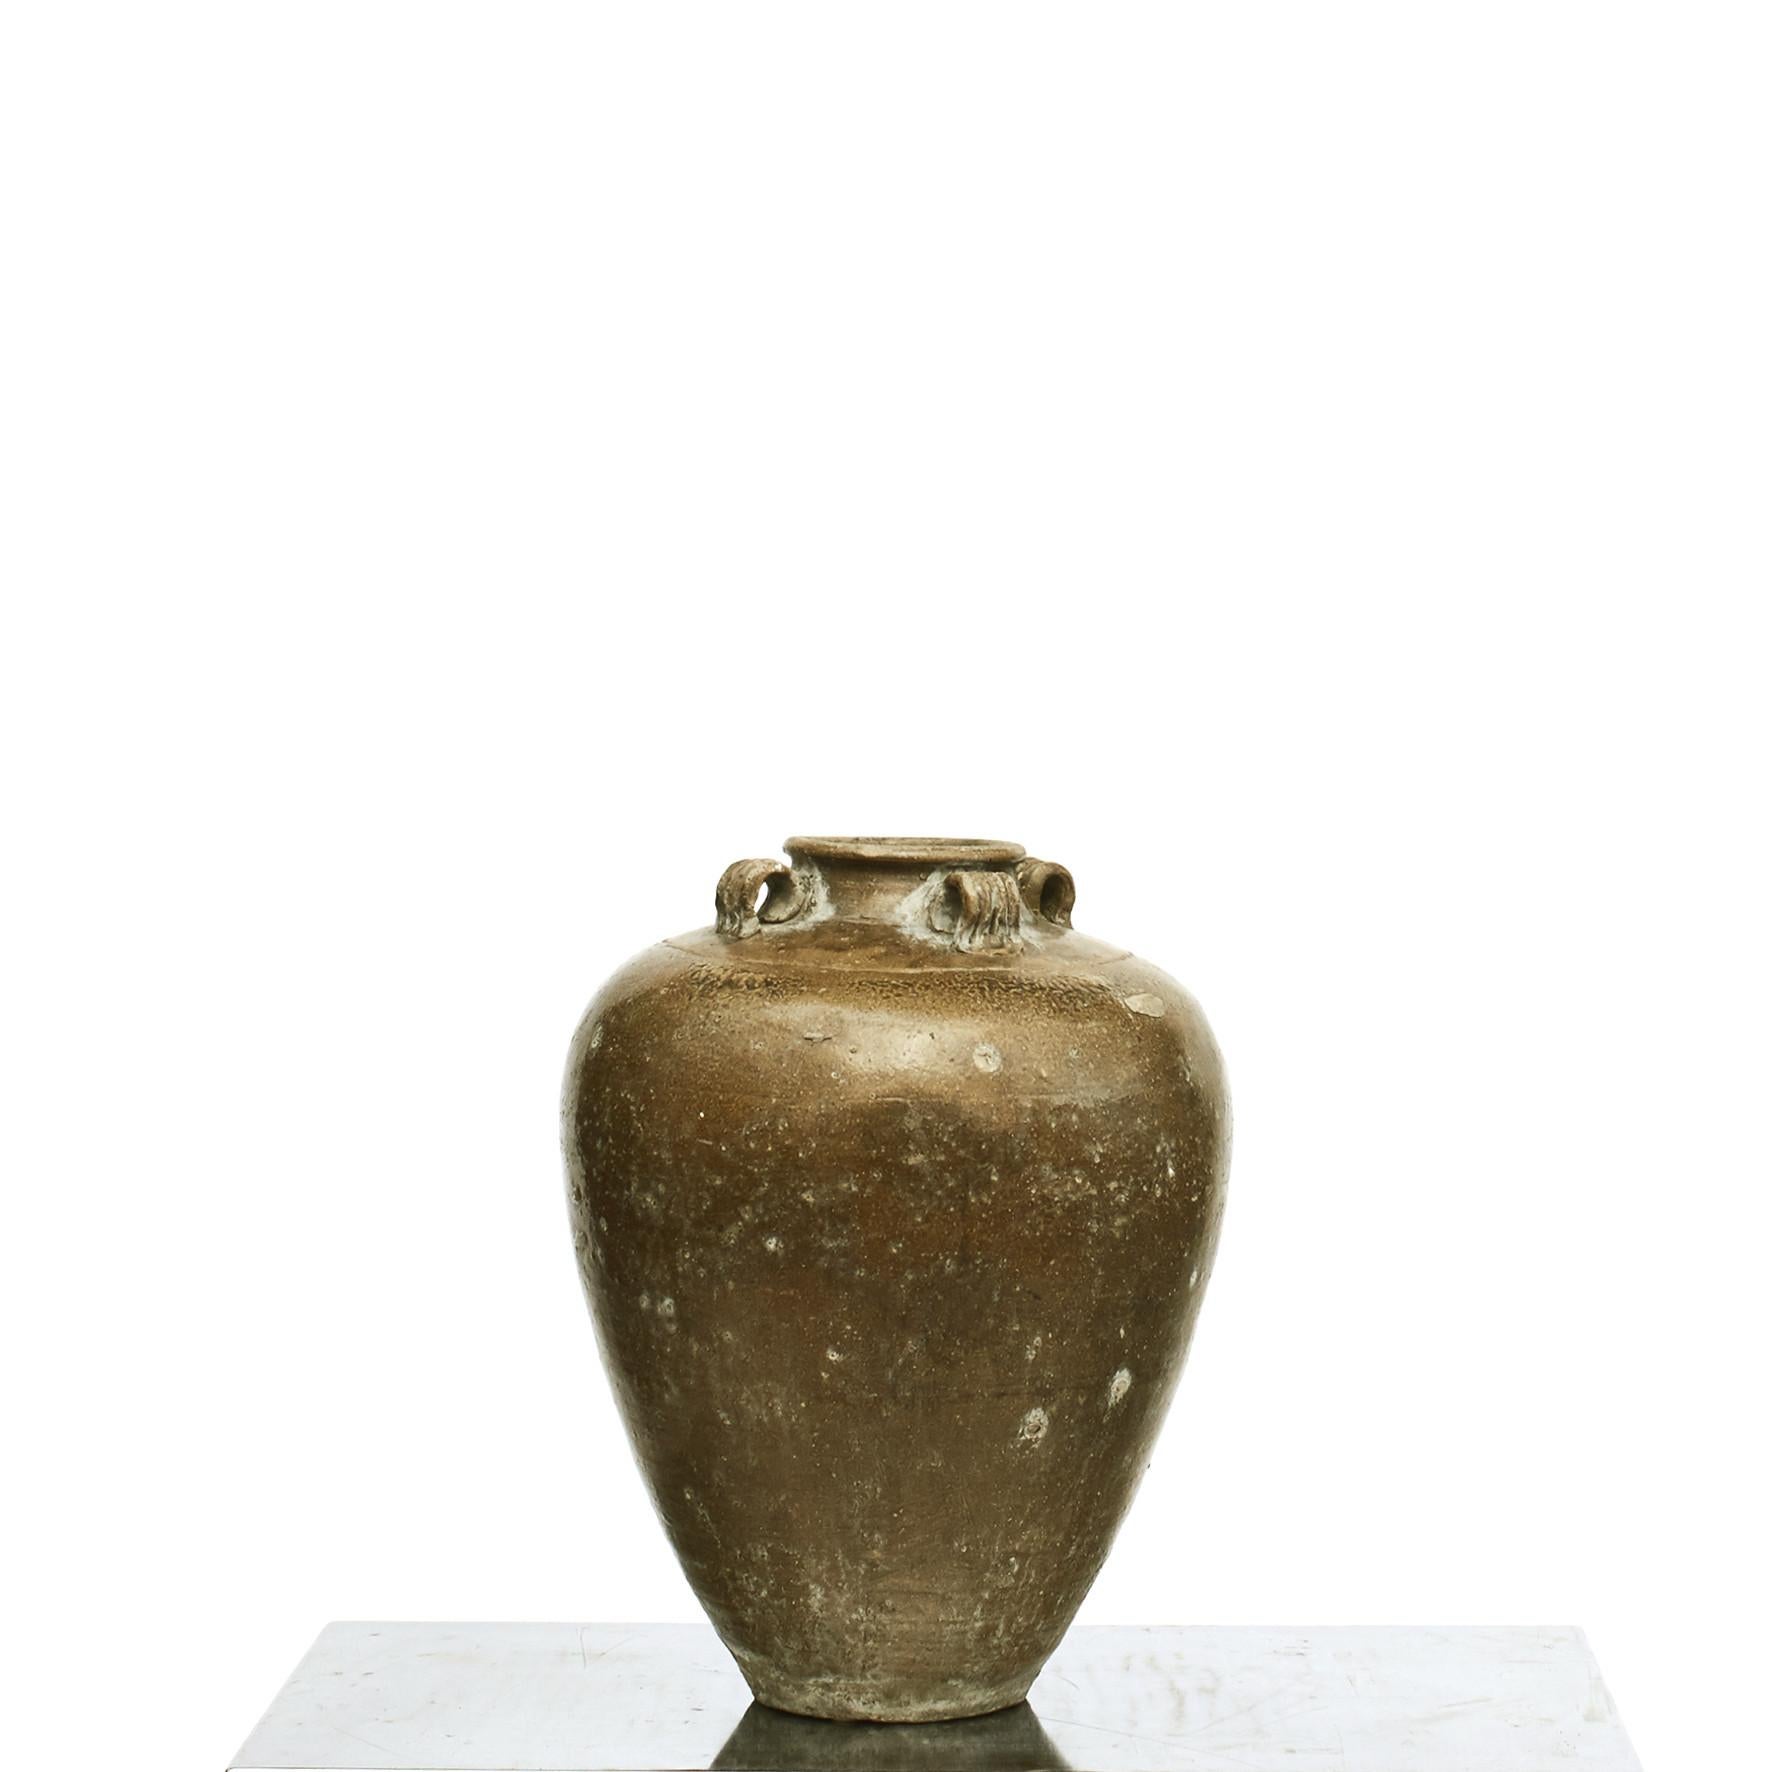 Chinese brown ochre glazed stoneware vinegar storage jar.
Decorative with god, natural patina,
China, 18-19th century.
Historically these jars were used to ferment and store vinegar in a Qing-dynasty kitchen.